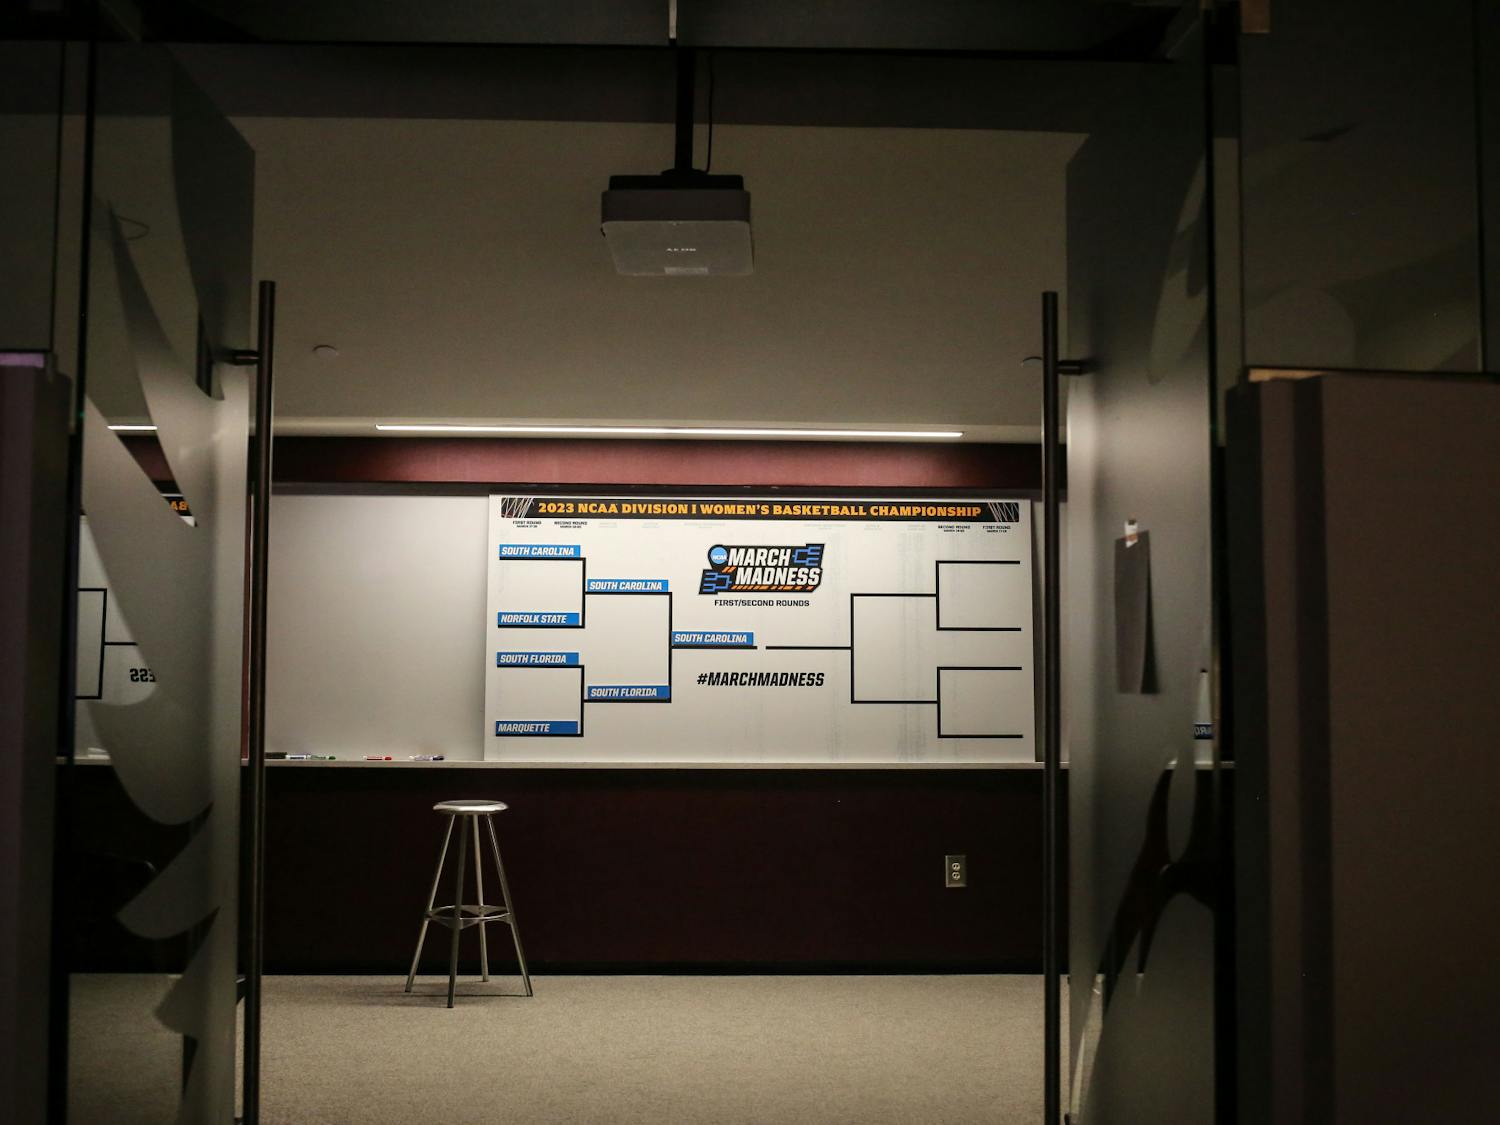 An updated NCAA bracket sits on display in the South Carolina locker room following the Gamecocks' win over South Florida in round two of the NCAA tournament at Colonial Life Arena on March 19, 2023. The Gamecocks defeated the Bulls 76-45.